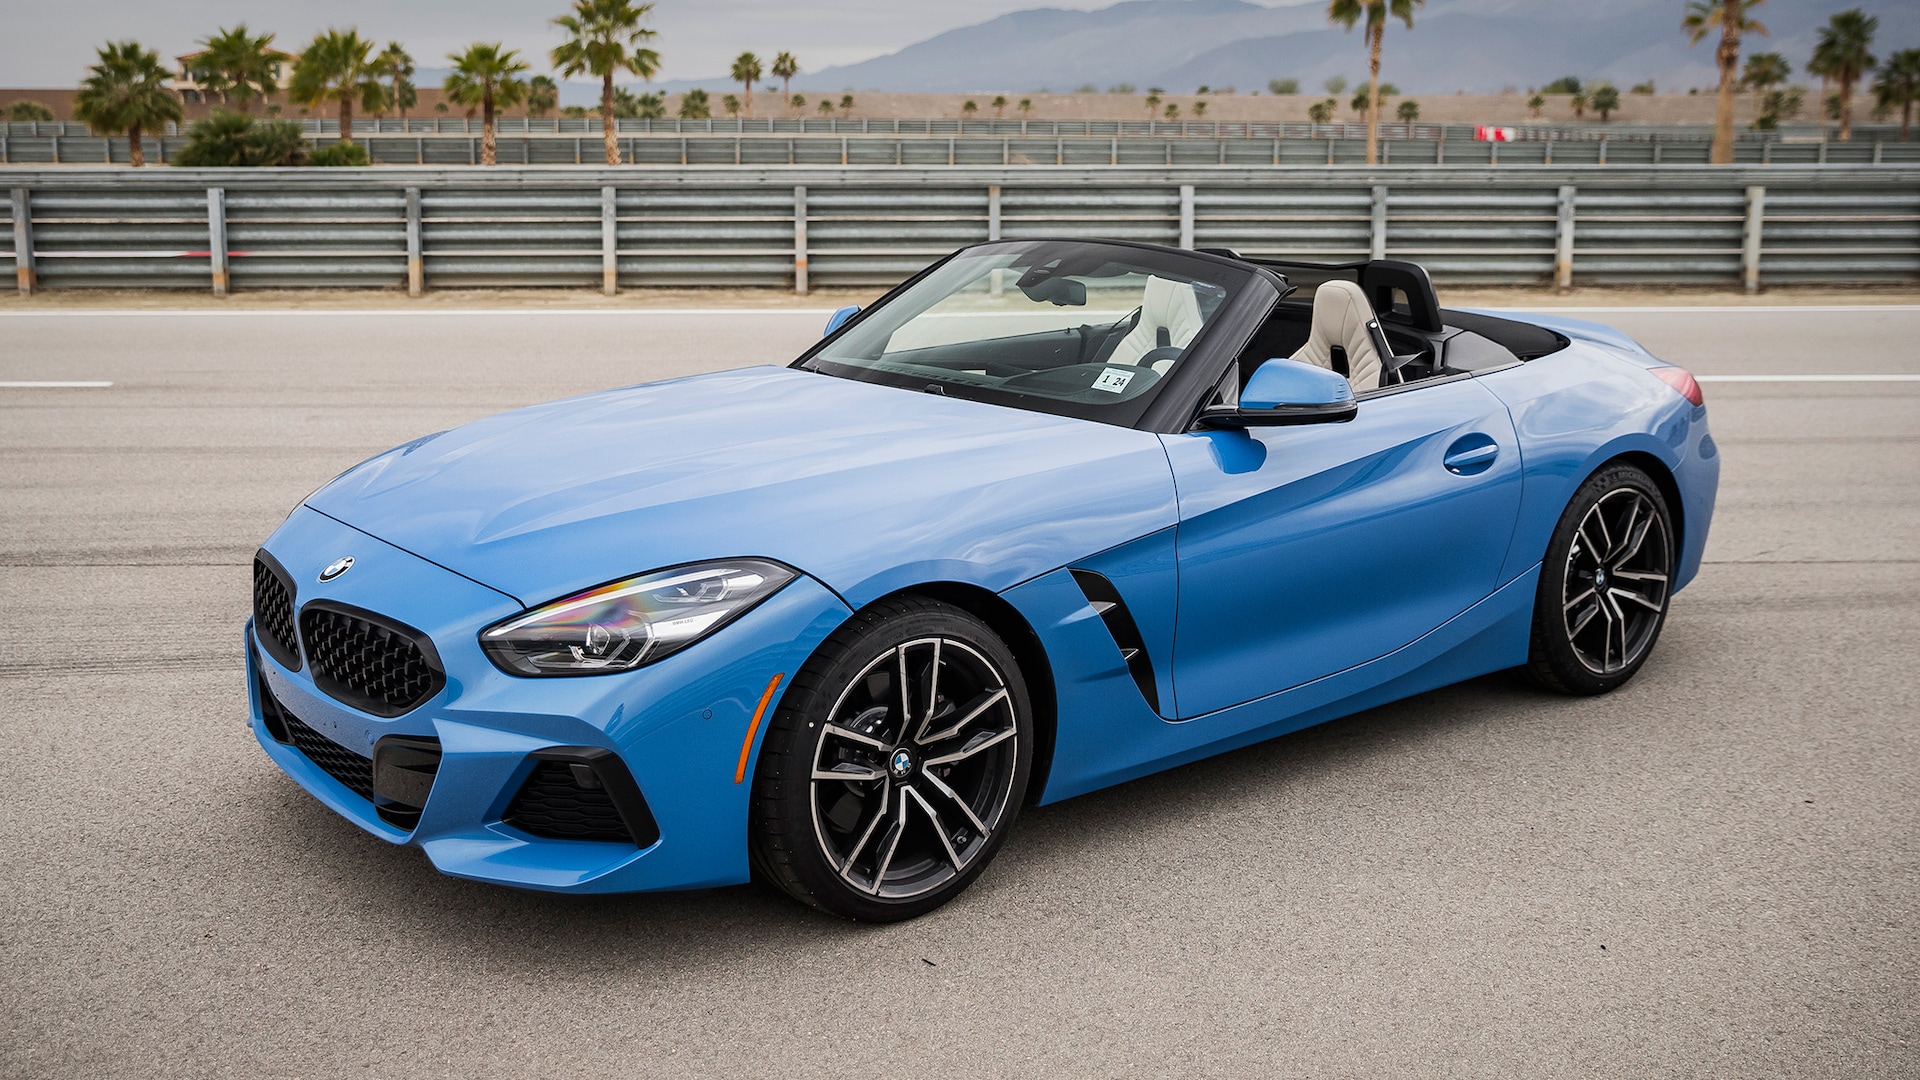 2019 BMW Z4 sDrive30i Review: Wet and Wild